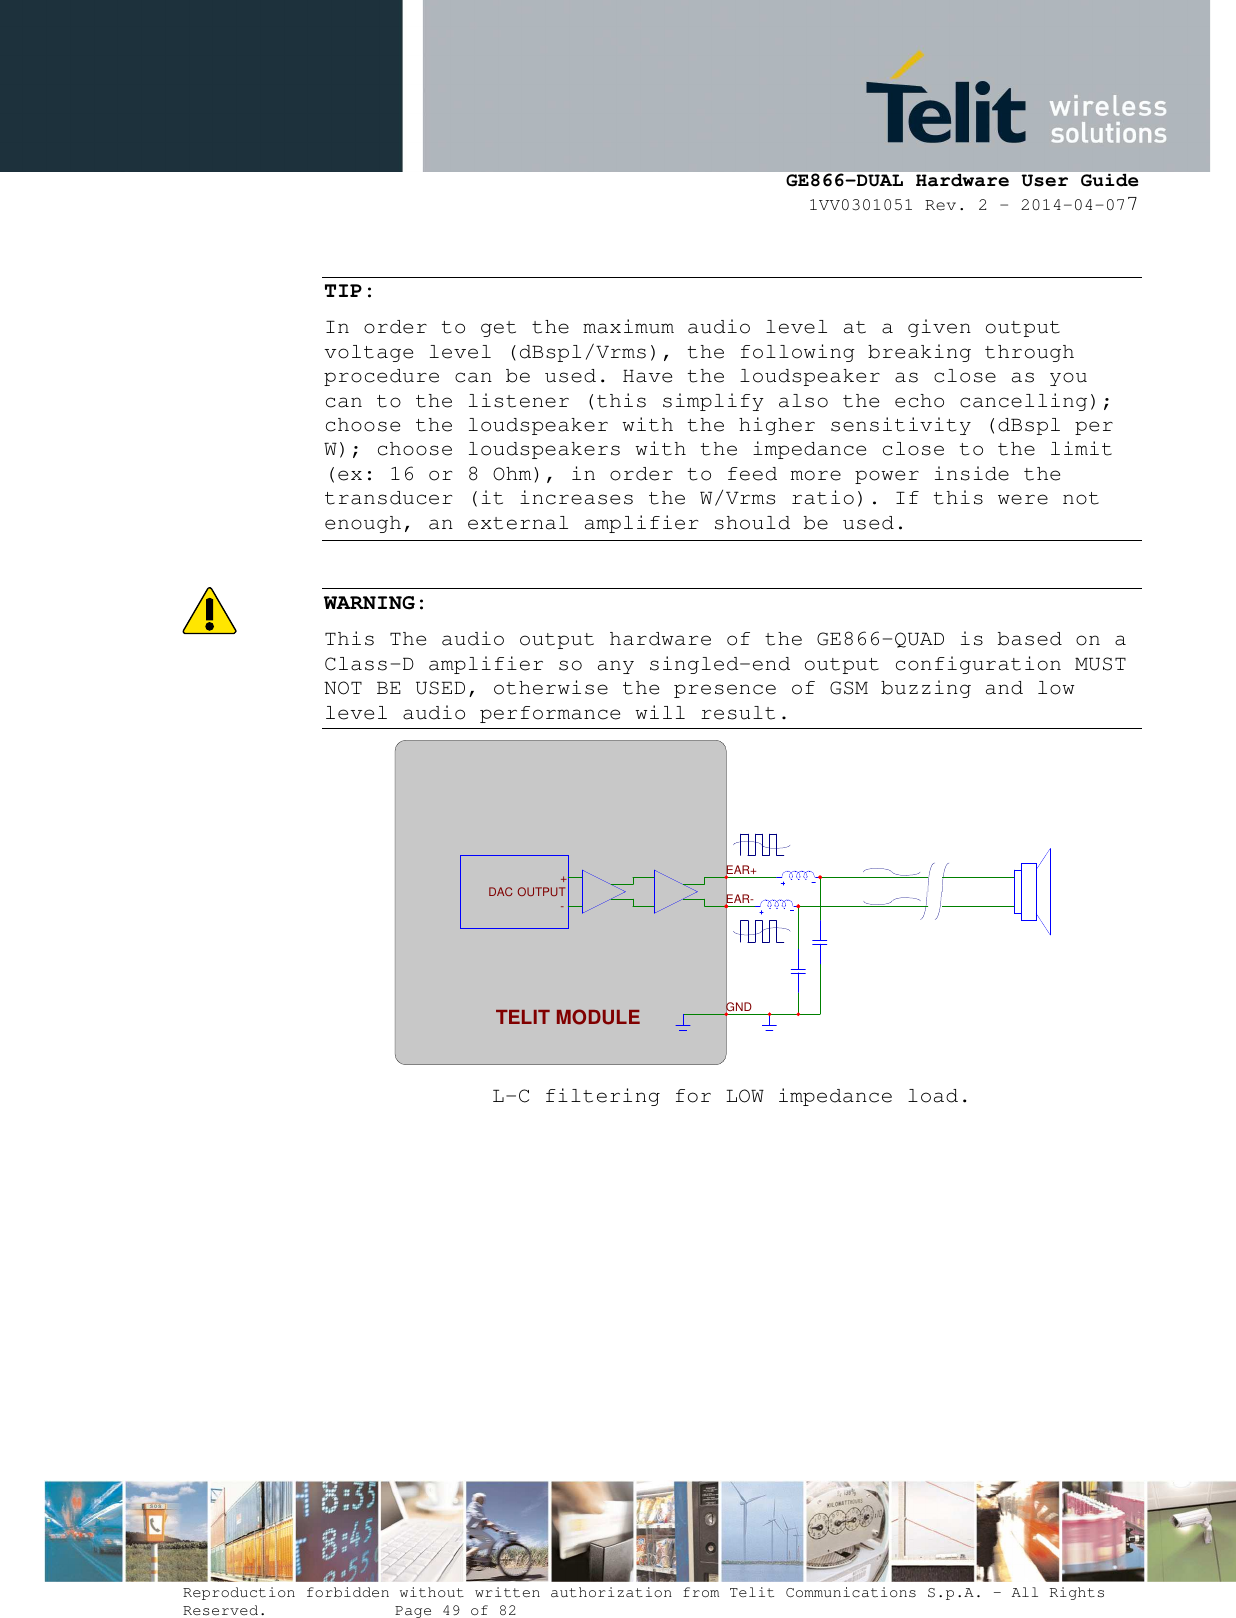      GE866-DUAL Hardware User Guide 1VV0301051 Rev. 2 – 2014-04-077  Reproduction forbidden without written authorization from Telit Communications S.p.A. - All Rights Reserved.    Page 49 of 82 Mod. 0805 2011-07 Rev.2  TIP: In order to get the maximum audio level at a given output voltage level (dBspl/Vrms), the following breaking through procedure can be used. Have the loudspeaker as close as you can to the listener (this simplify also the echo cancelling); choose the loudspeaker with the higher sensitivity (dBspl per W); choose loudspeakers with the impedance close to the limit (ex: 16 or 8 Ohm), in order to feed more power inside the transducer (it increases the W/Vrms ratio). If this were not enough, an external amplifier should be used.  WARNING: This The audio output hardware of the GE866-QUAD is based on a Class-D amplifier so any singled-end output configuration MUST NOT BE USED, otherwise the presence of GSM buzzing and low level audio performance will result.  L-C filtering for LOW impedance load.  EAR+ EAR-TELIT MODULE-+ OUTPUTDACGND 